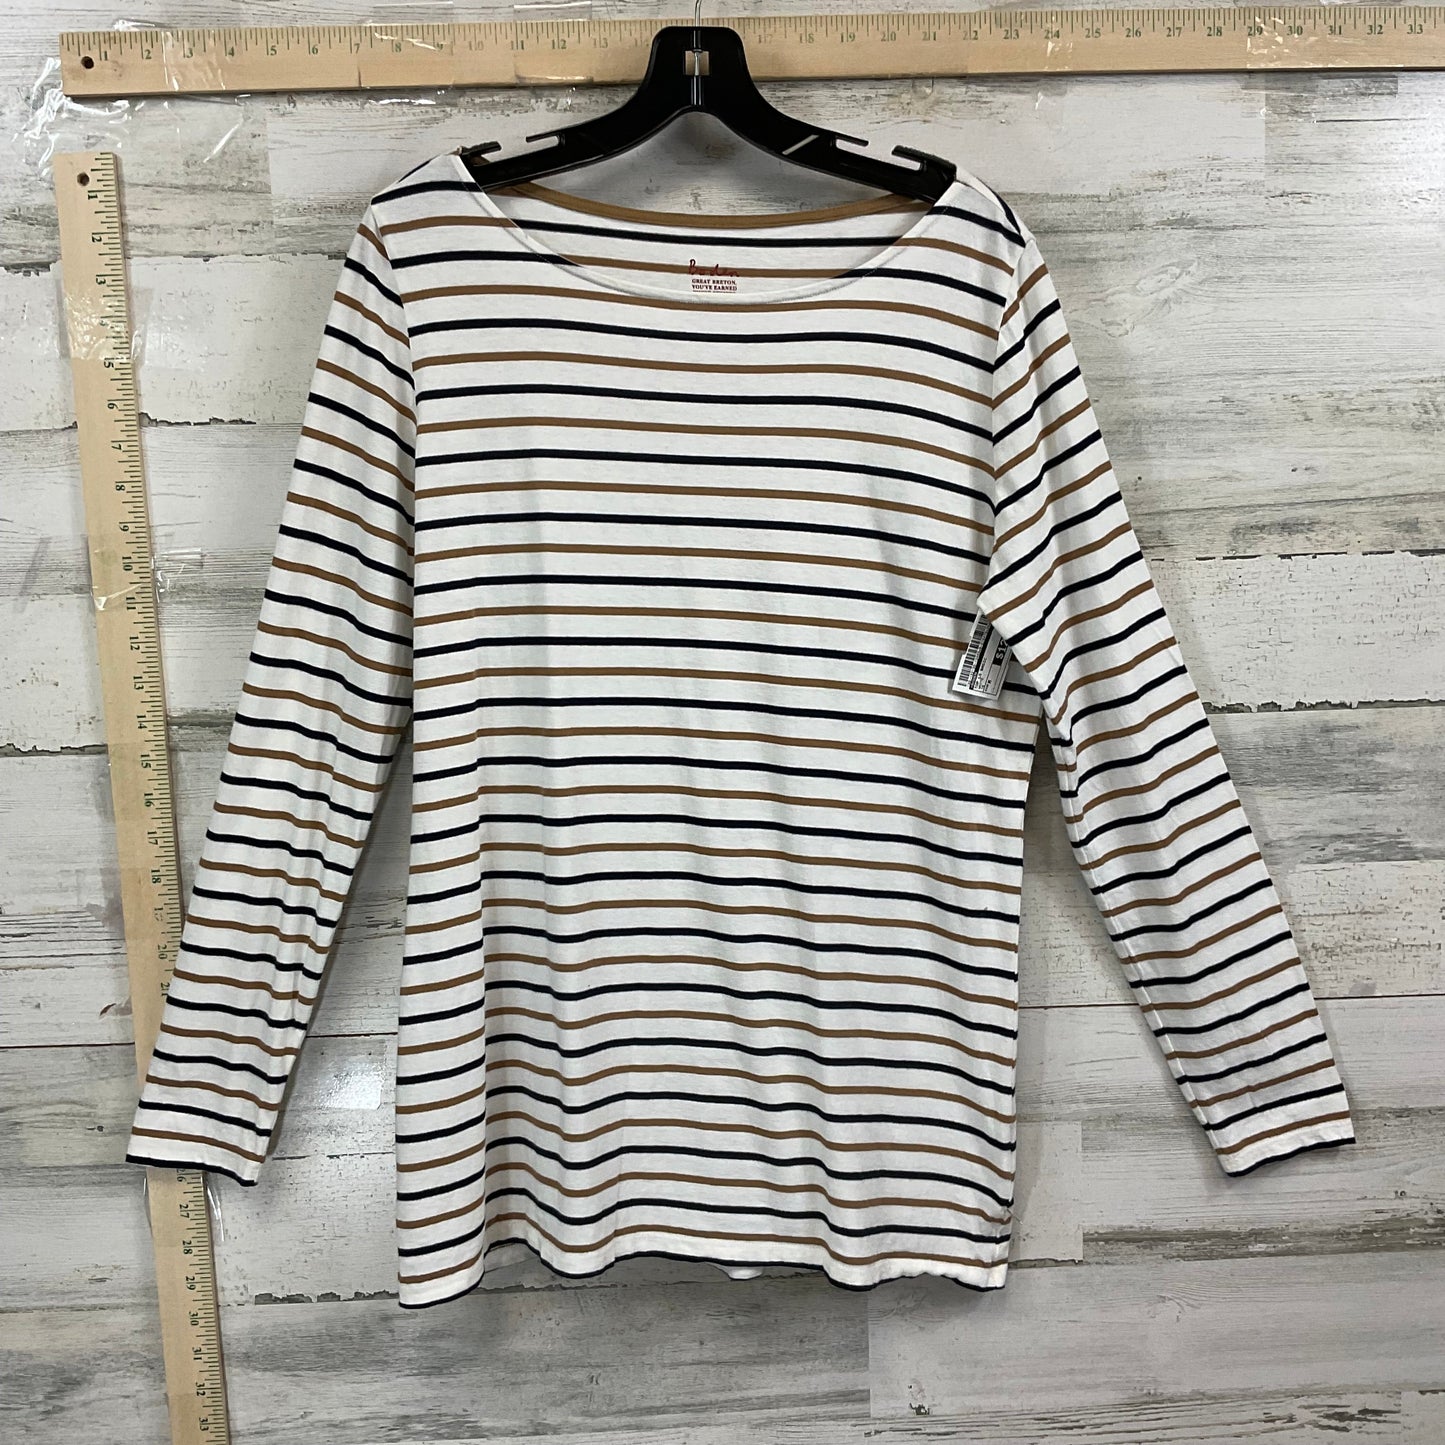 White Top Long Sleeve Basic Boden, Size M